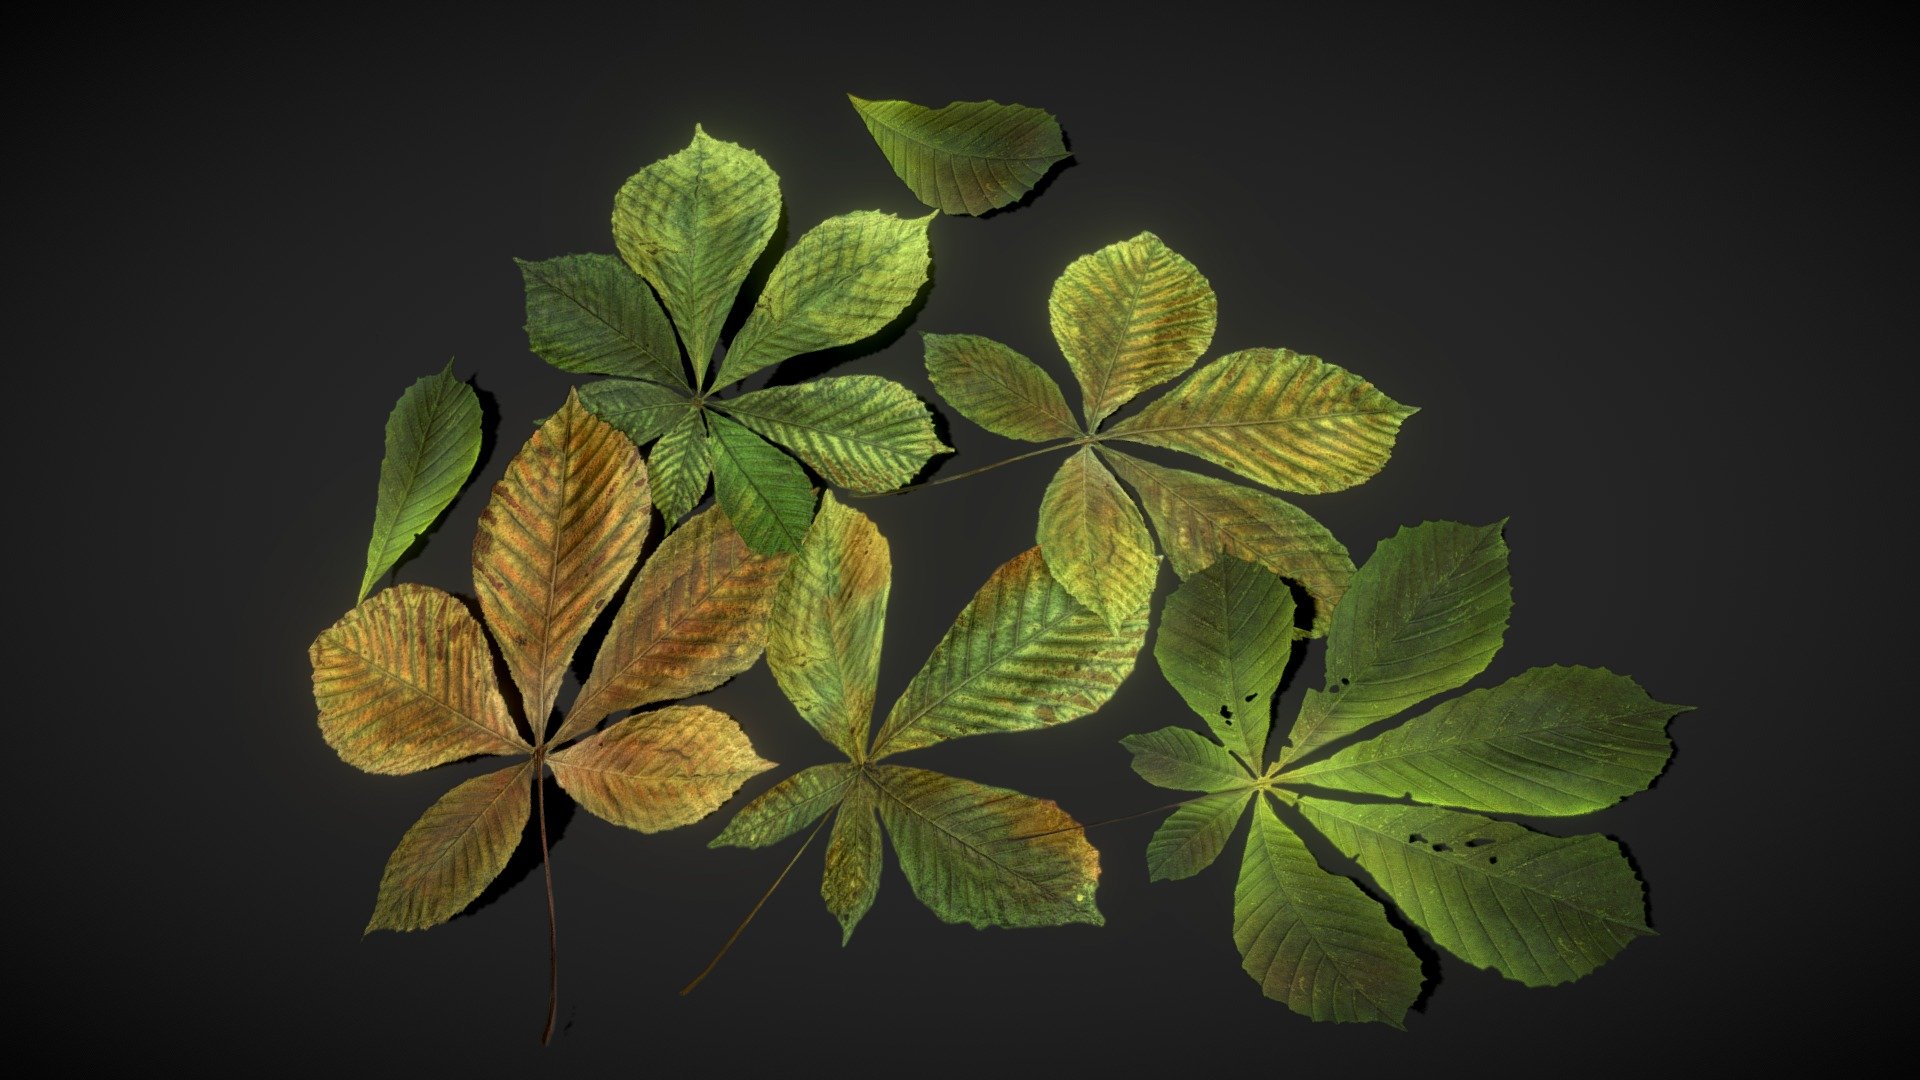 Horse Chestnut Leaves / Autumn Leaves Foliage

atlases / foliage 4096x4096 PNG texture

Textures include:




Base Color

Normal

Roughness

Opacity

AO

Triangles: 48
Vertices: 57 - Chestnut Leaves - low poly - Buy Royalty Free 3D model by Karolina Renkiewicz (@KarolinaRenkiewicz) 3d model